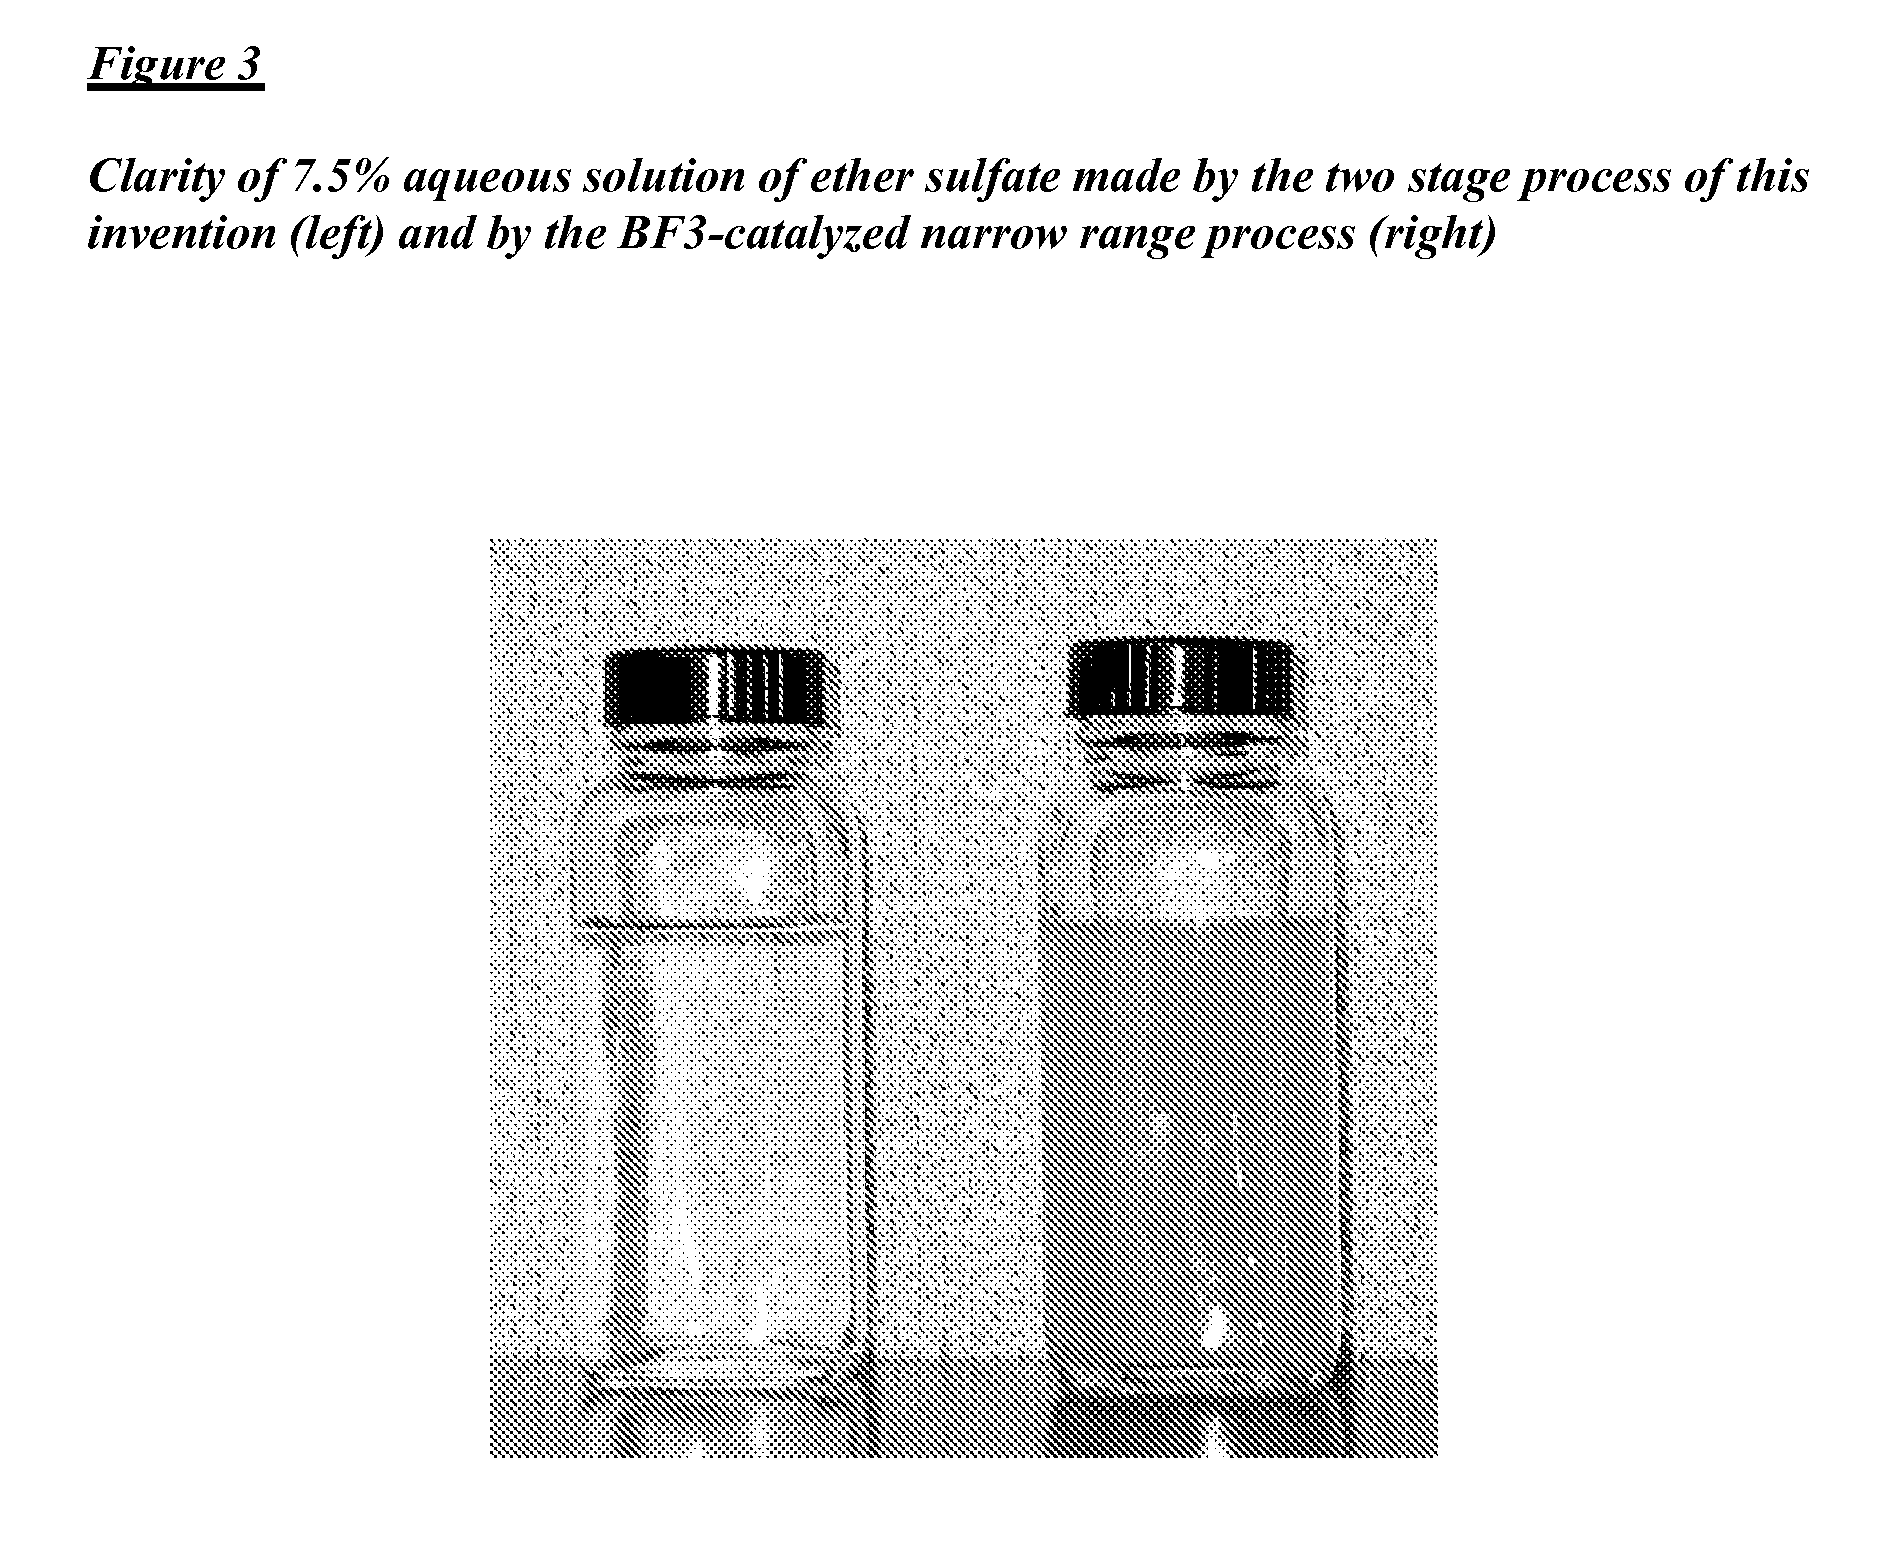 Method for preparation of and compositions of low foam, non-gelling, surfactants